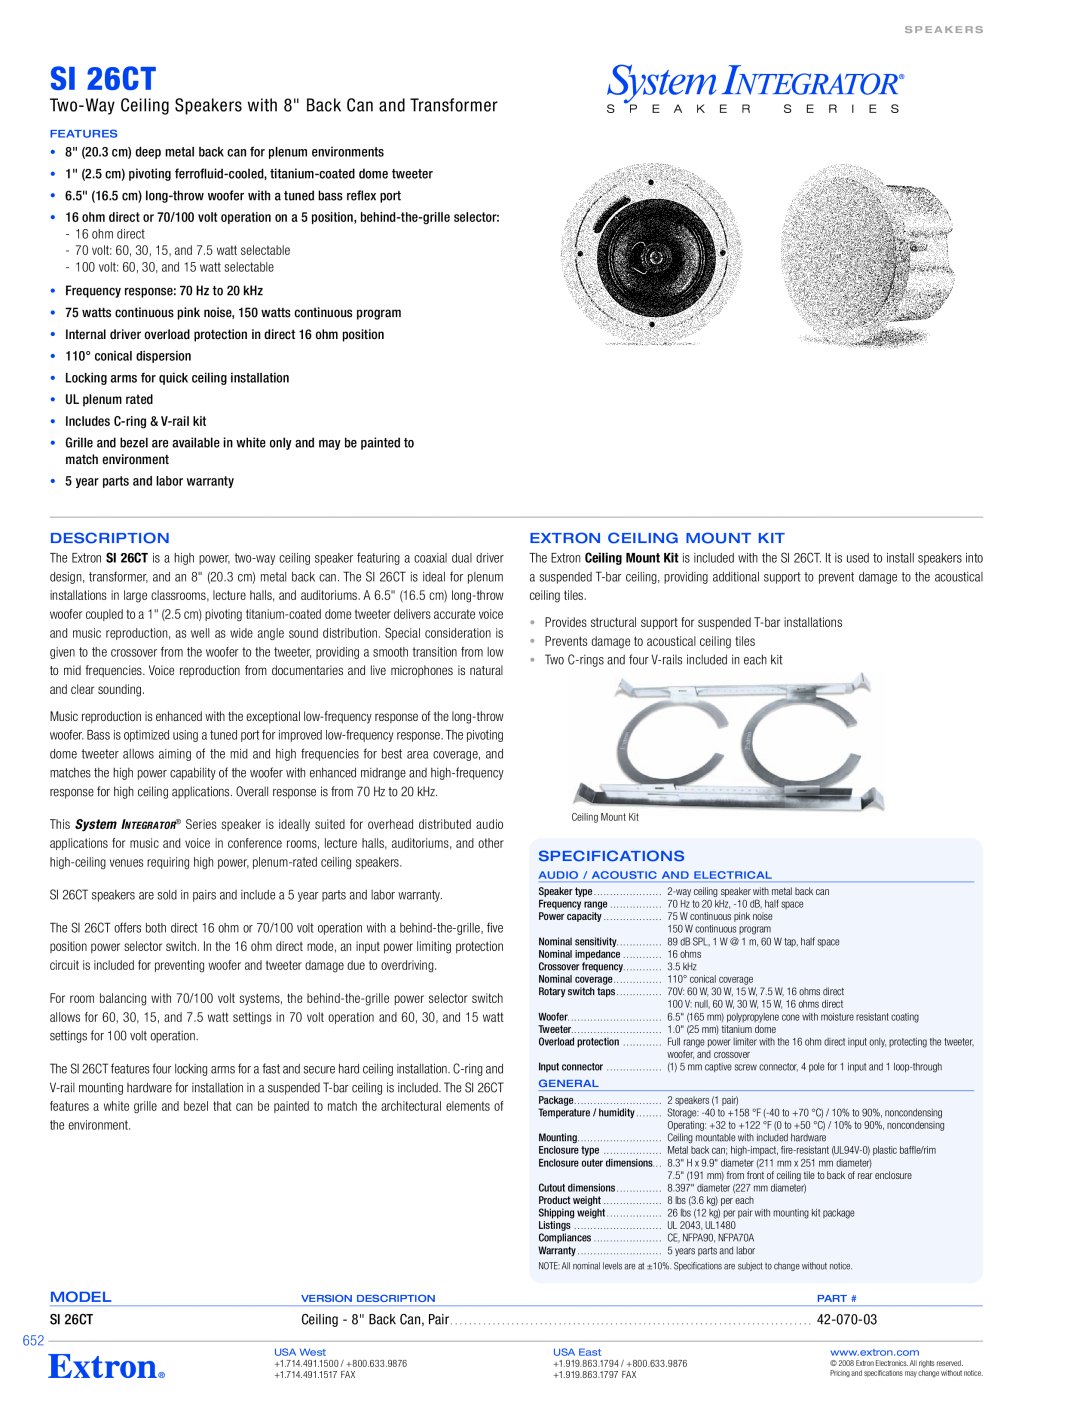 Extron electronic SI 26CT specifications Description, Extron Ceiling Mount Kit, Specifications, Model, 42-070-03 